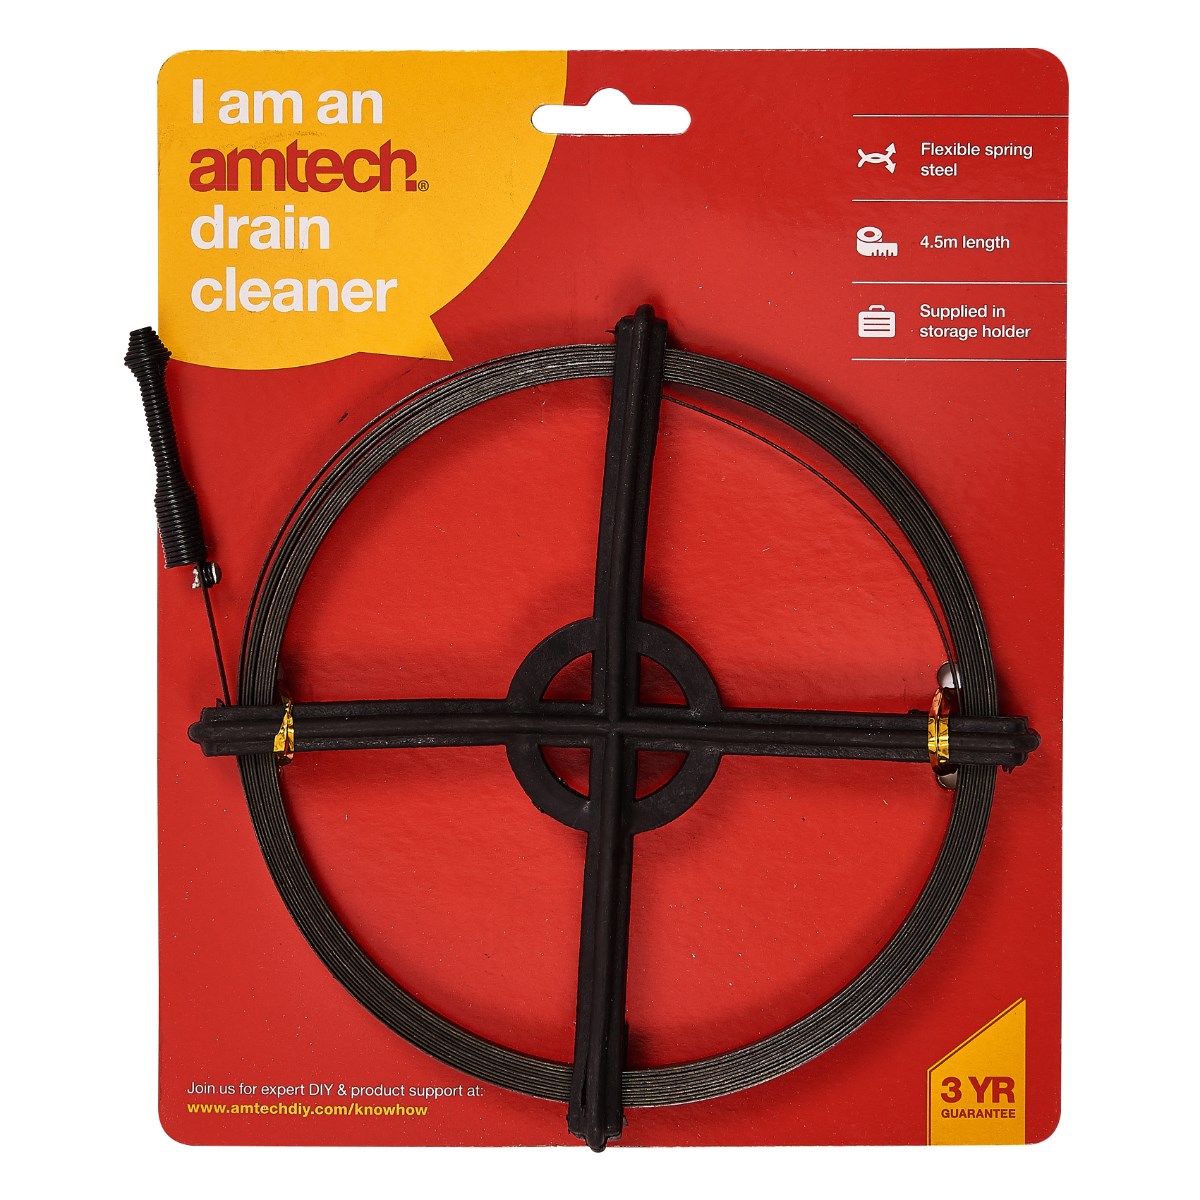 Amtech New Drain and Pipe Cleaner For Small or Medium Household Drains 